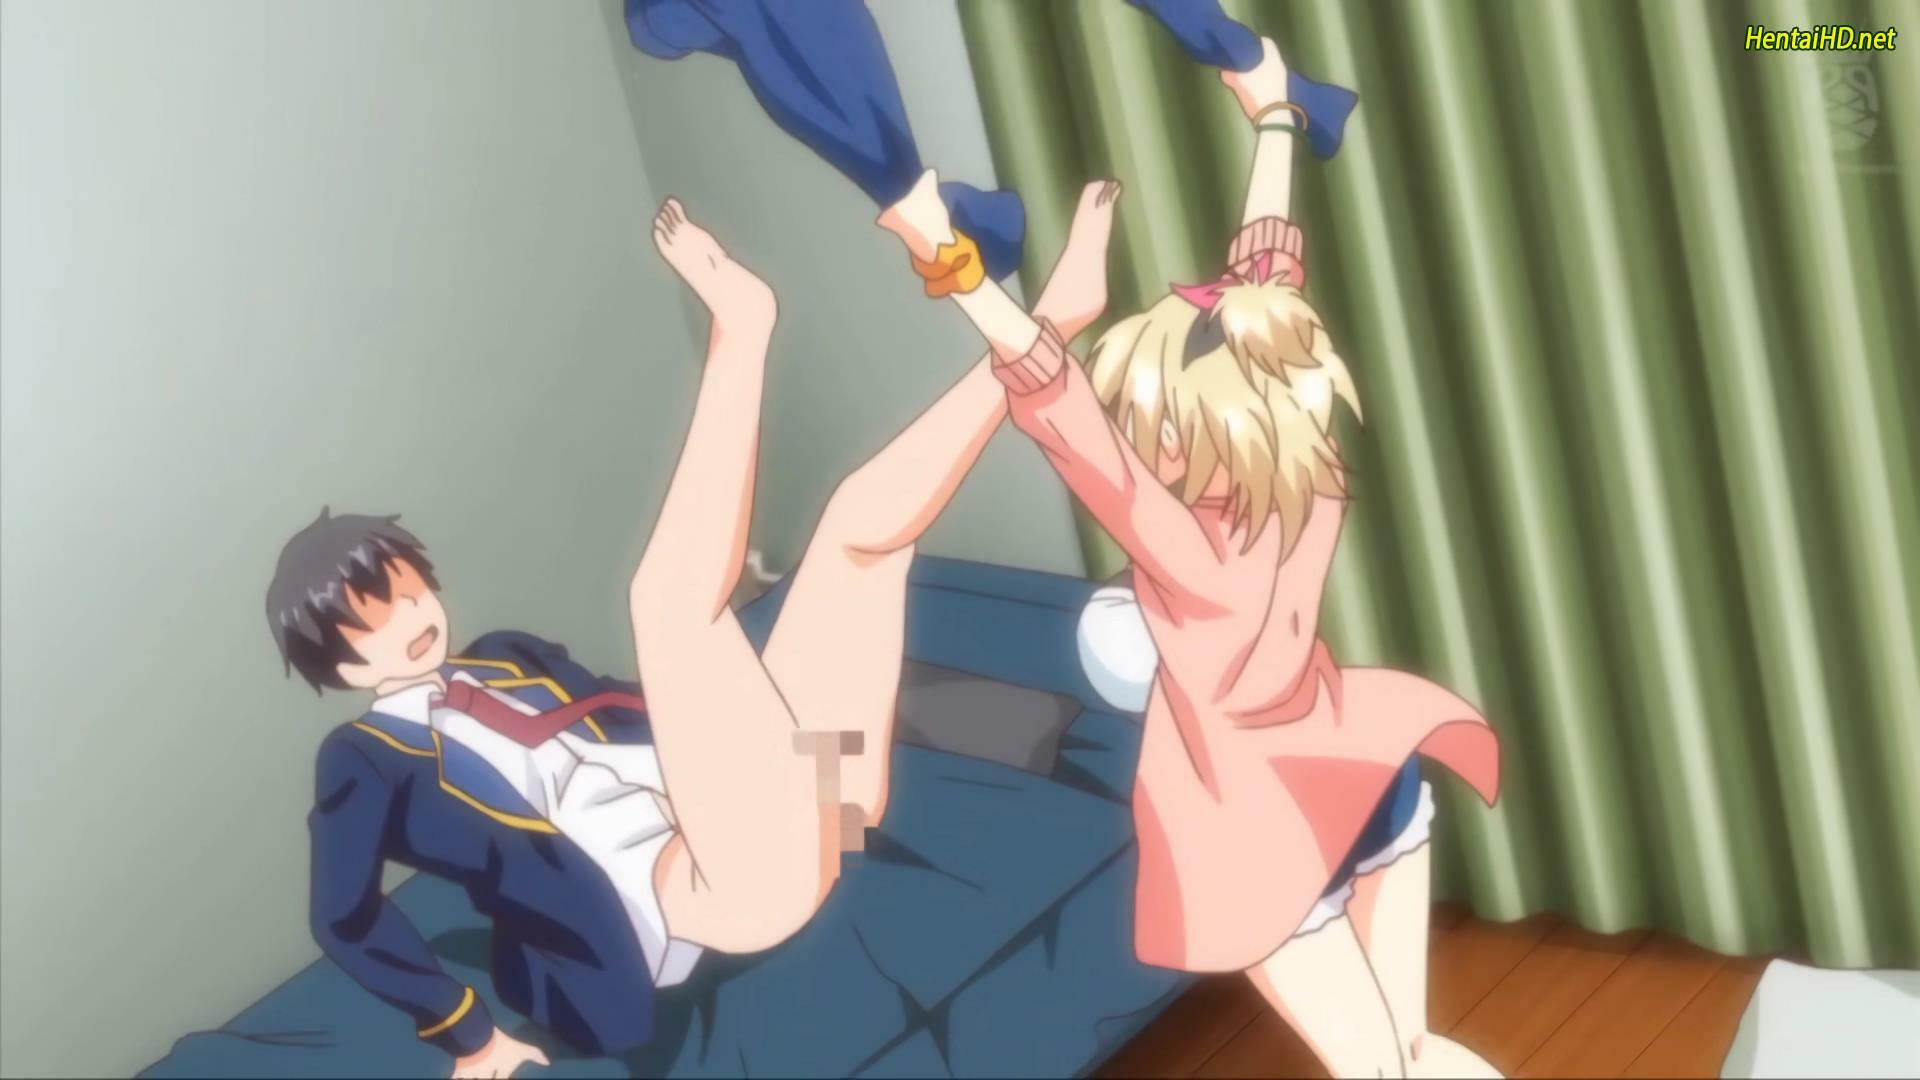 Real eroge situation 2 the animation